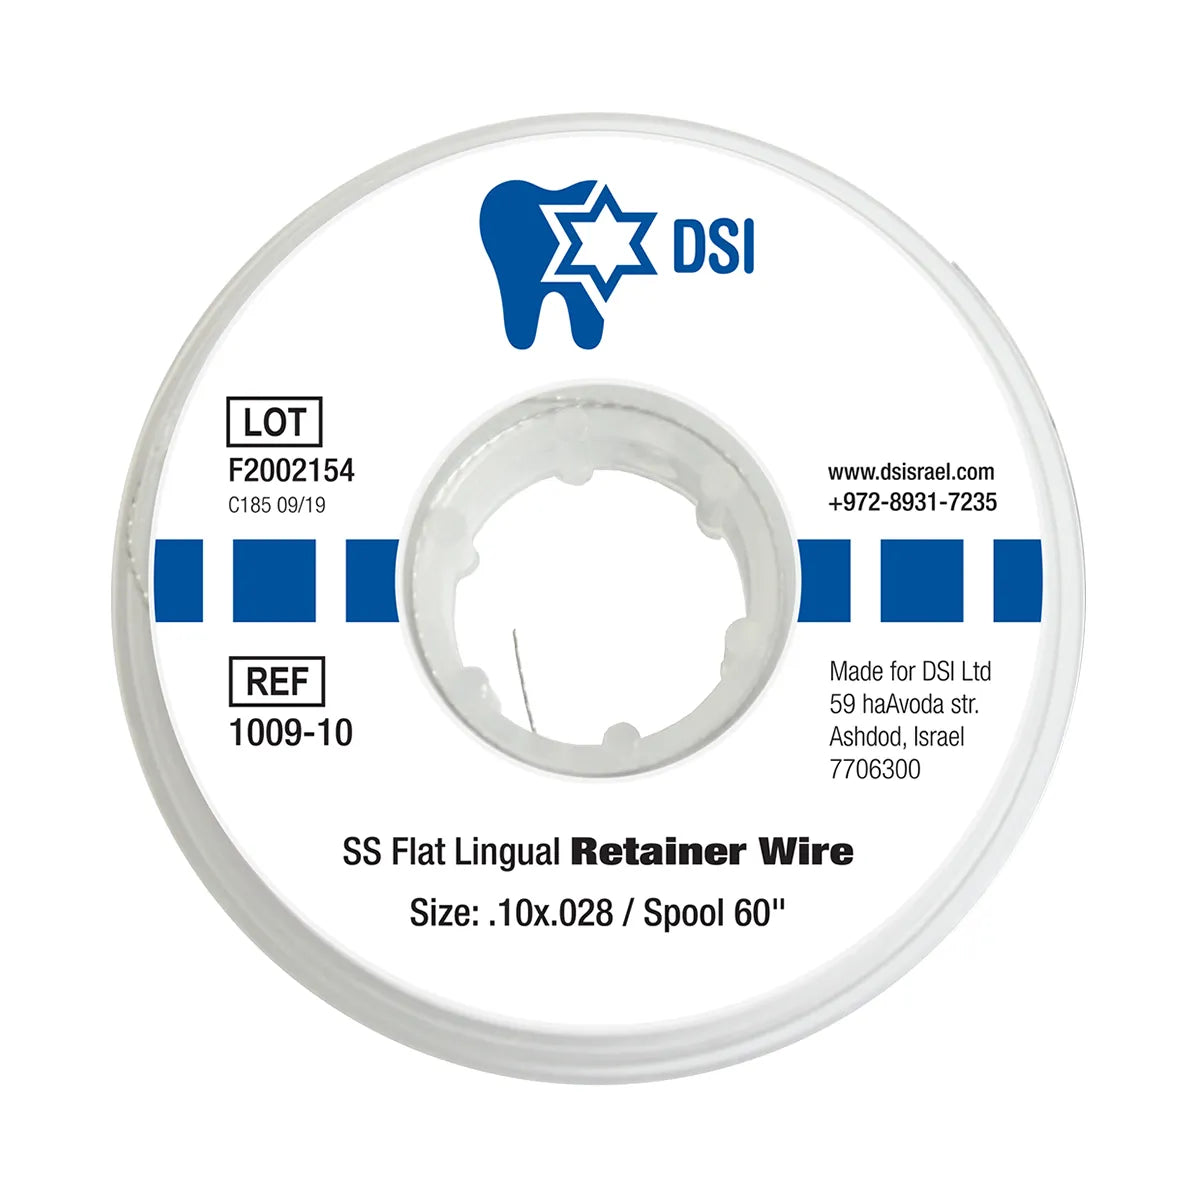 DSI SS Flat Lingual Retainer Wire 4-Strand .10x.028 60" Spool